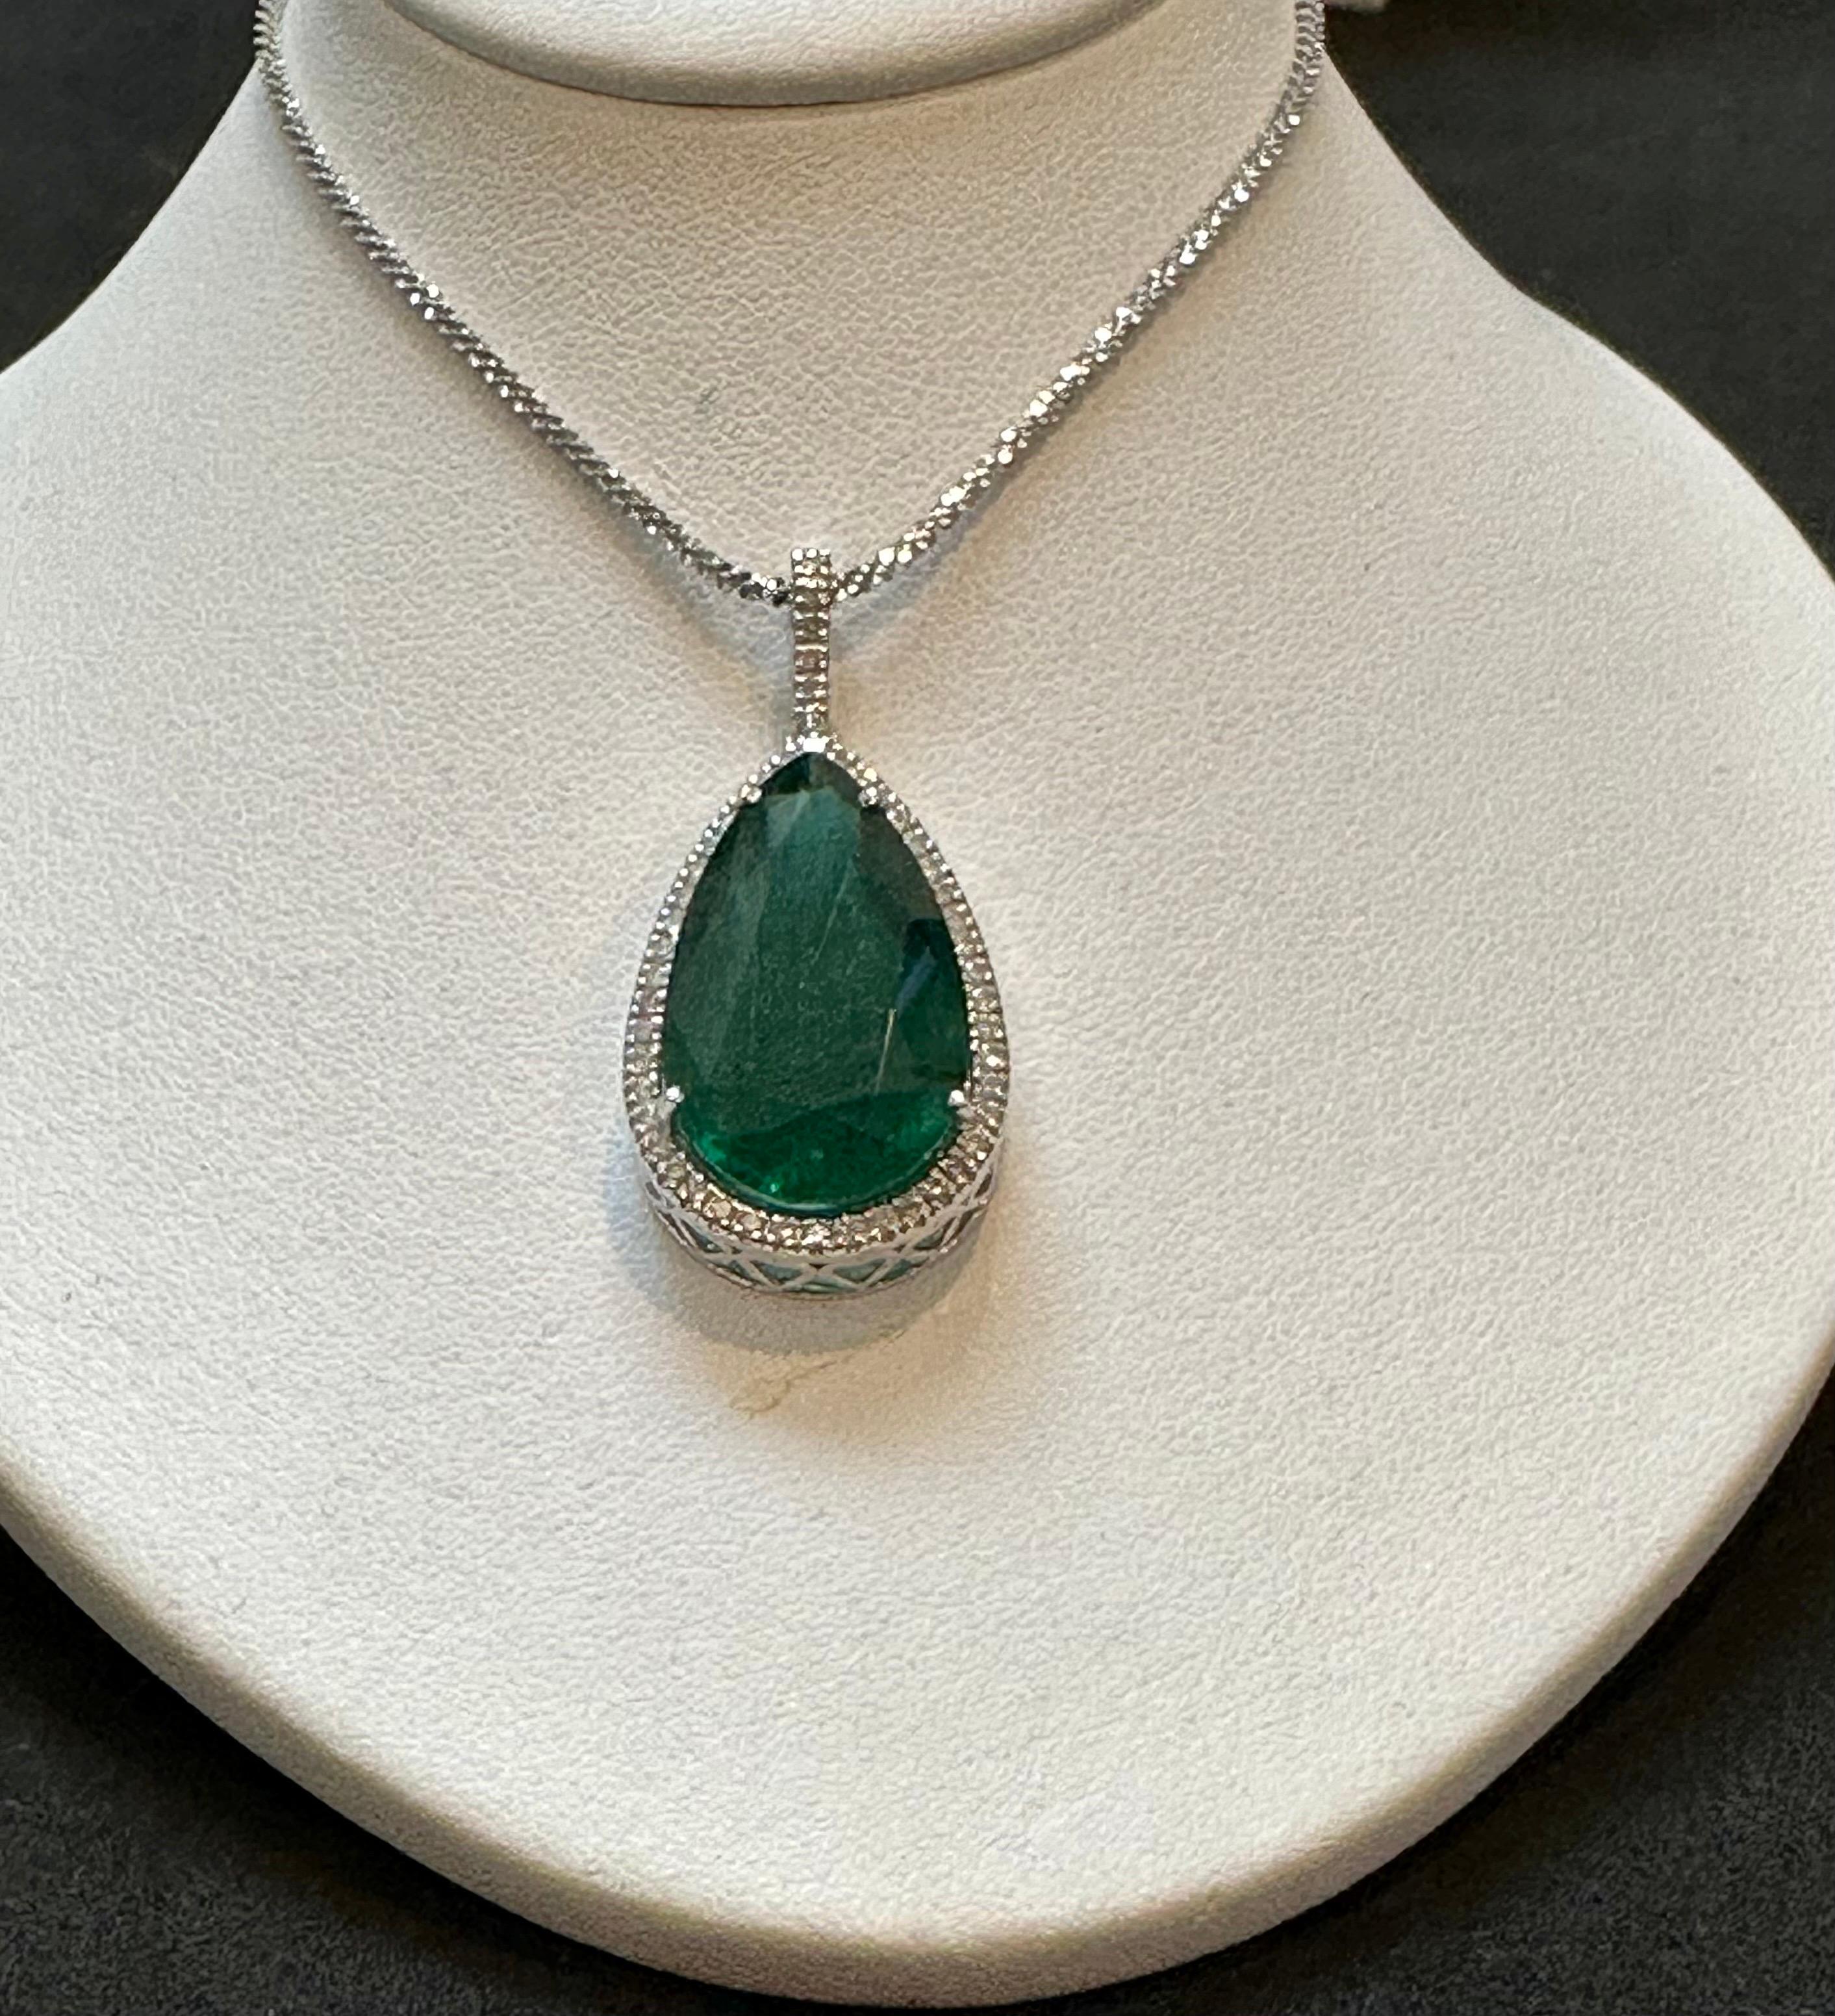 19 Ct Pear Cut Emerald & 1 Ct Diamond Halo Pendent/Necklace 14 KW Gold Chain For Sale 1